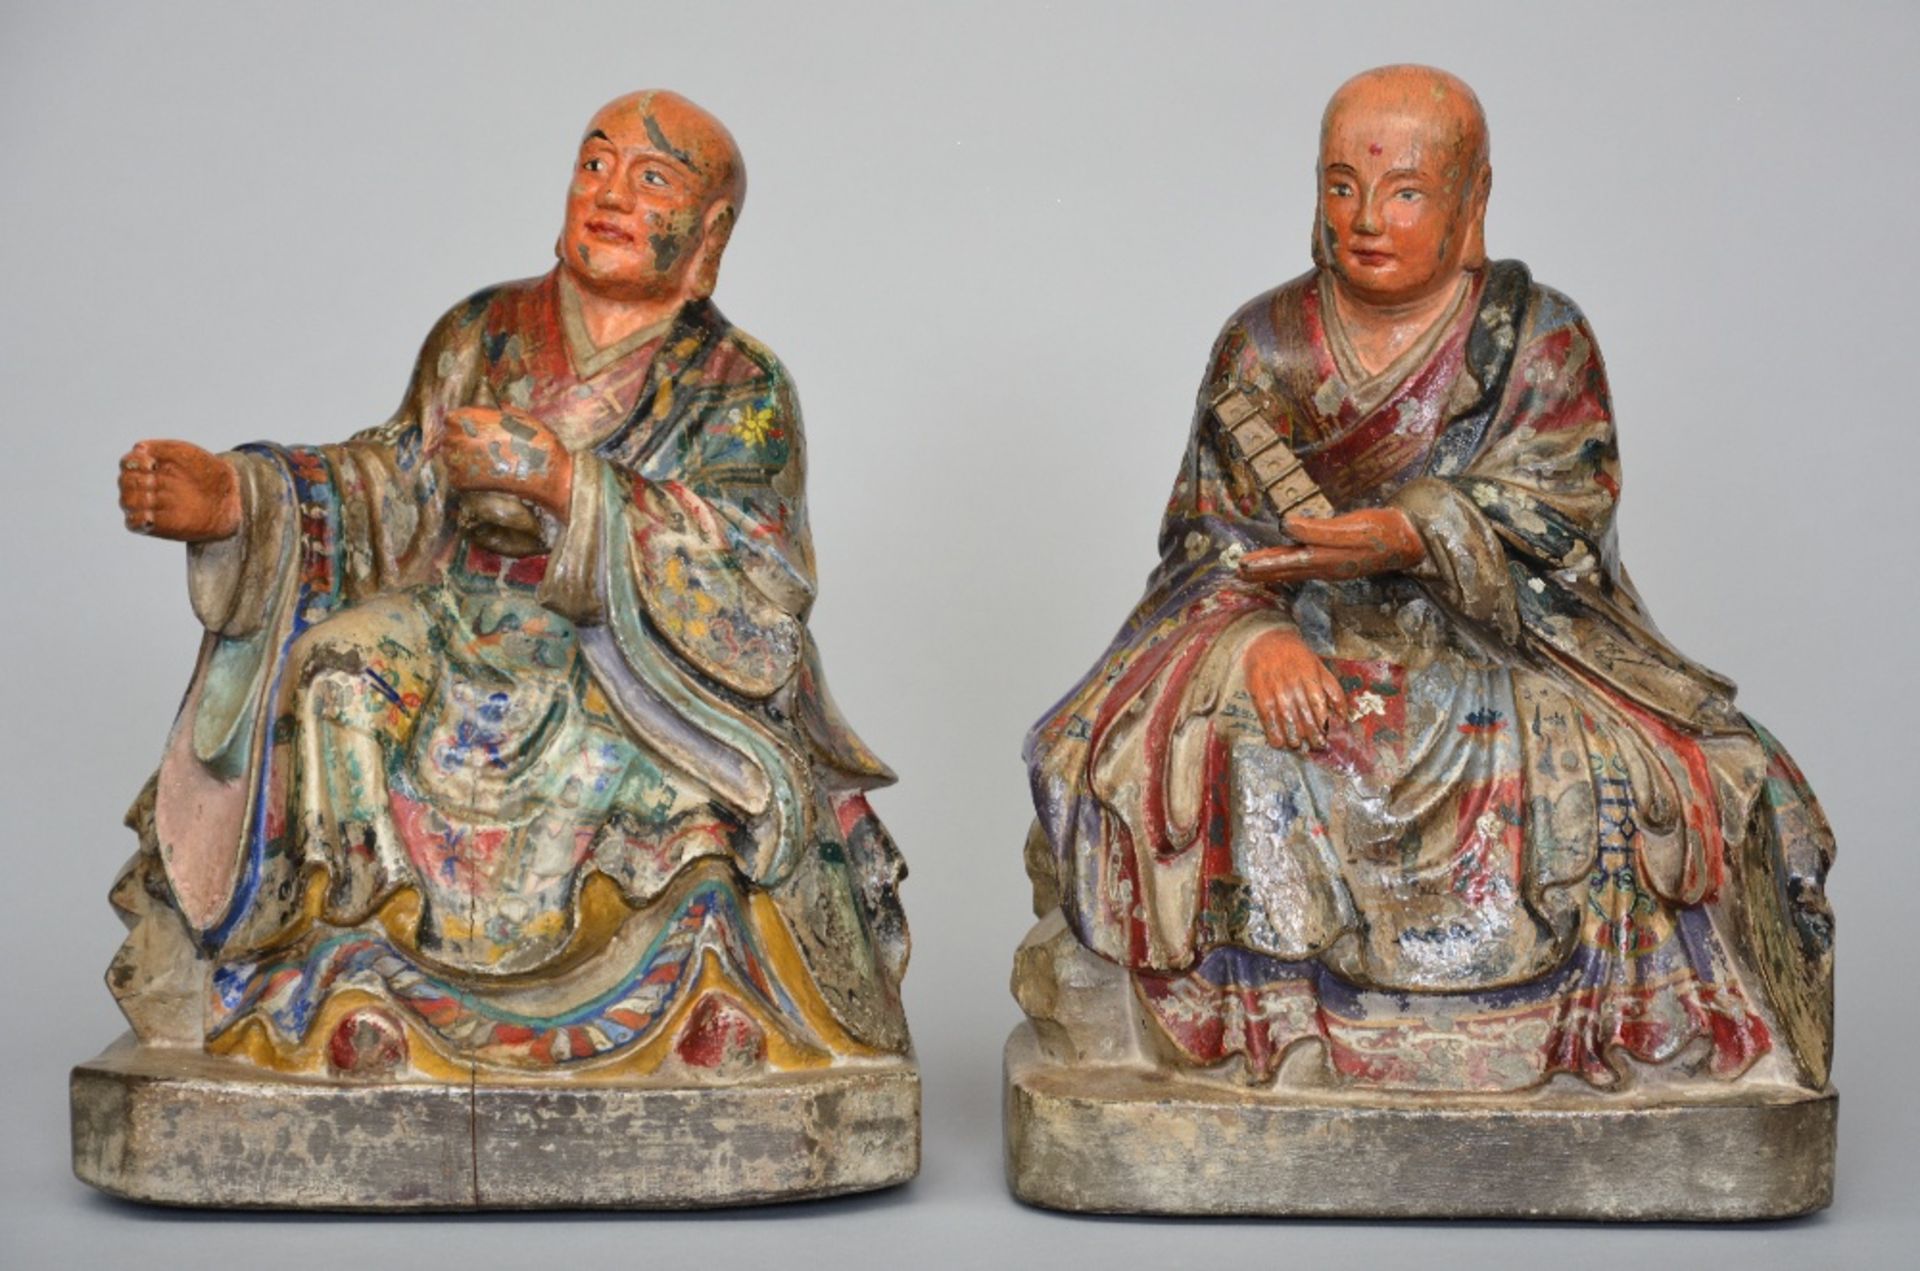 Two Oriental polychromed wooden Buddhist monks, ca. 1900, H 31 - 32 cm (damage to the polychrome)